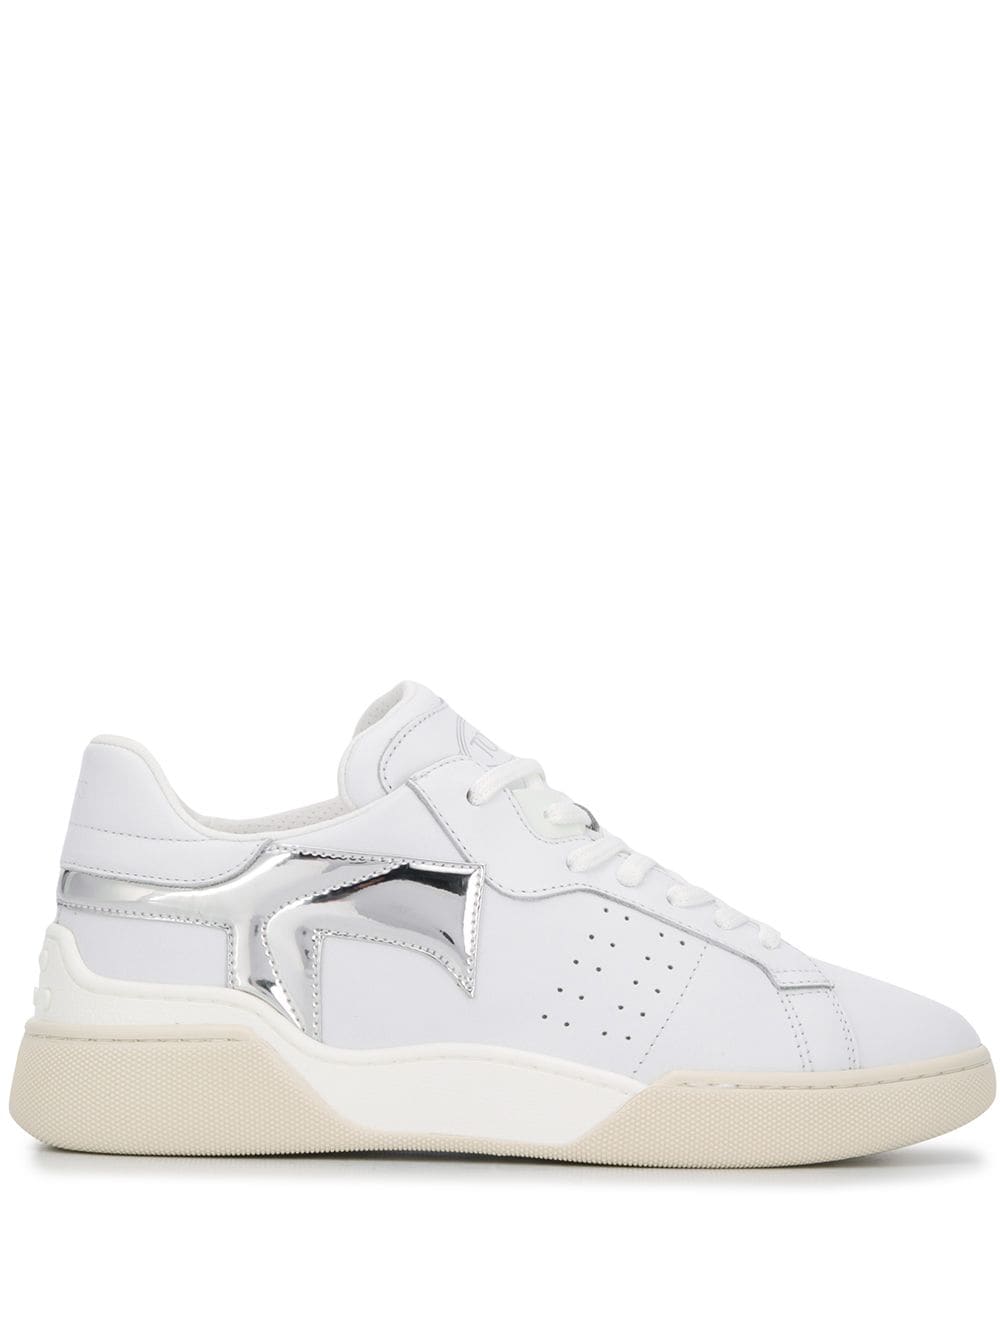 tod's white leather sneakers